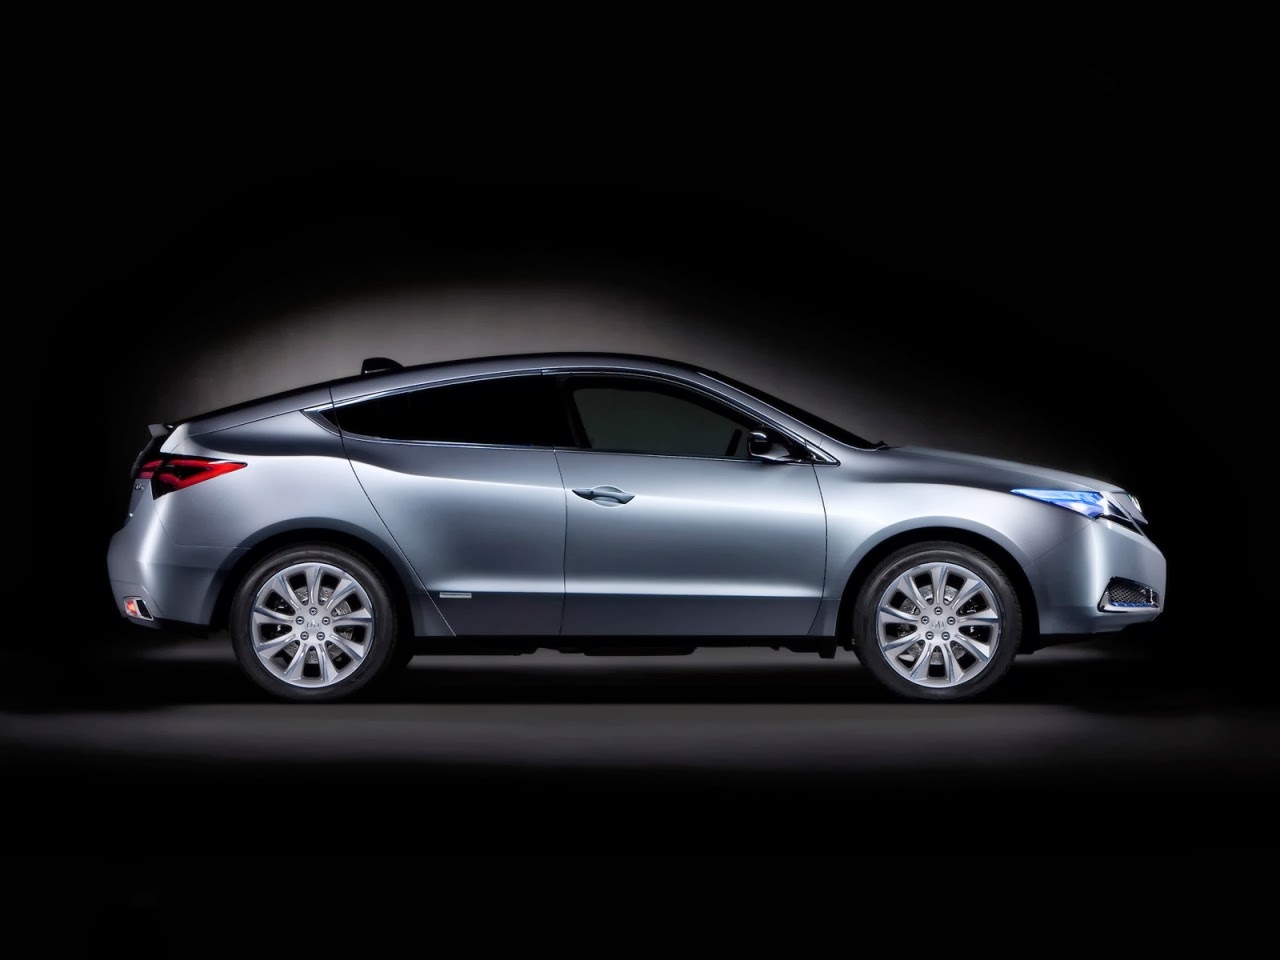 http://www.crazywallpapers.in/2014/02/acura-zdx-pictures.html